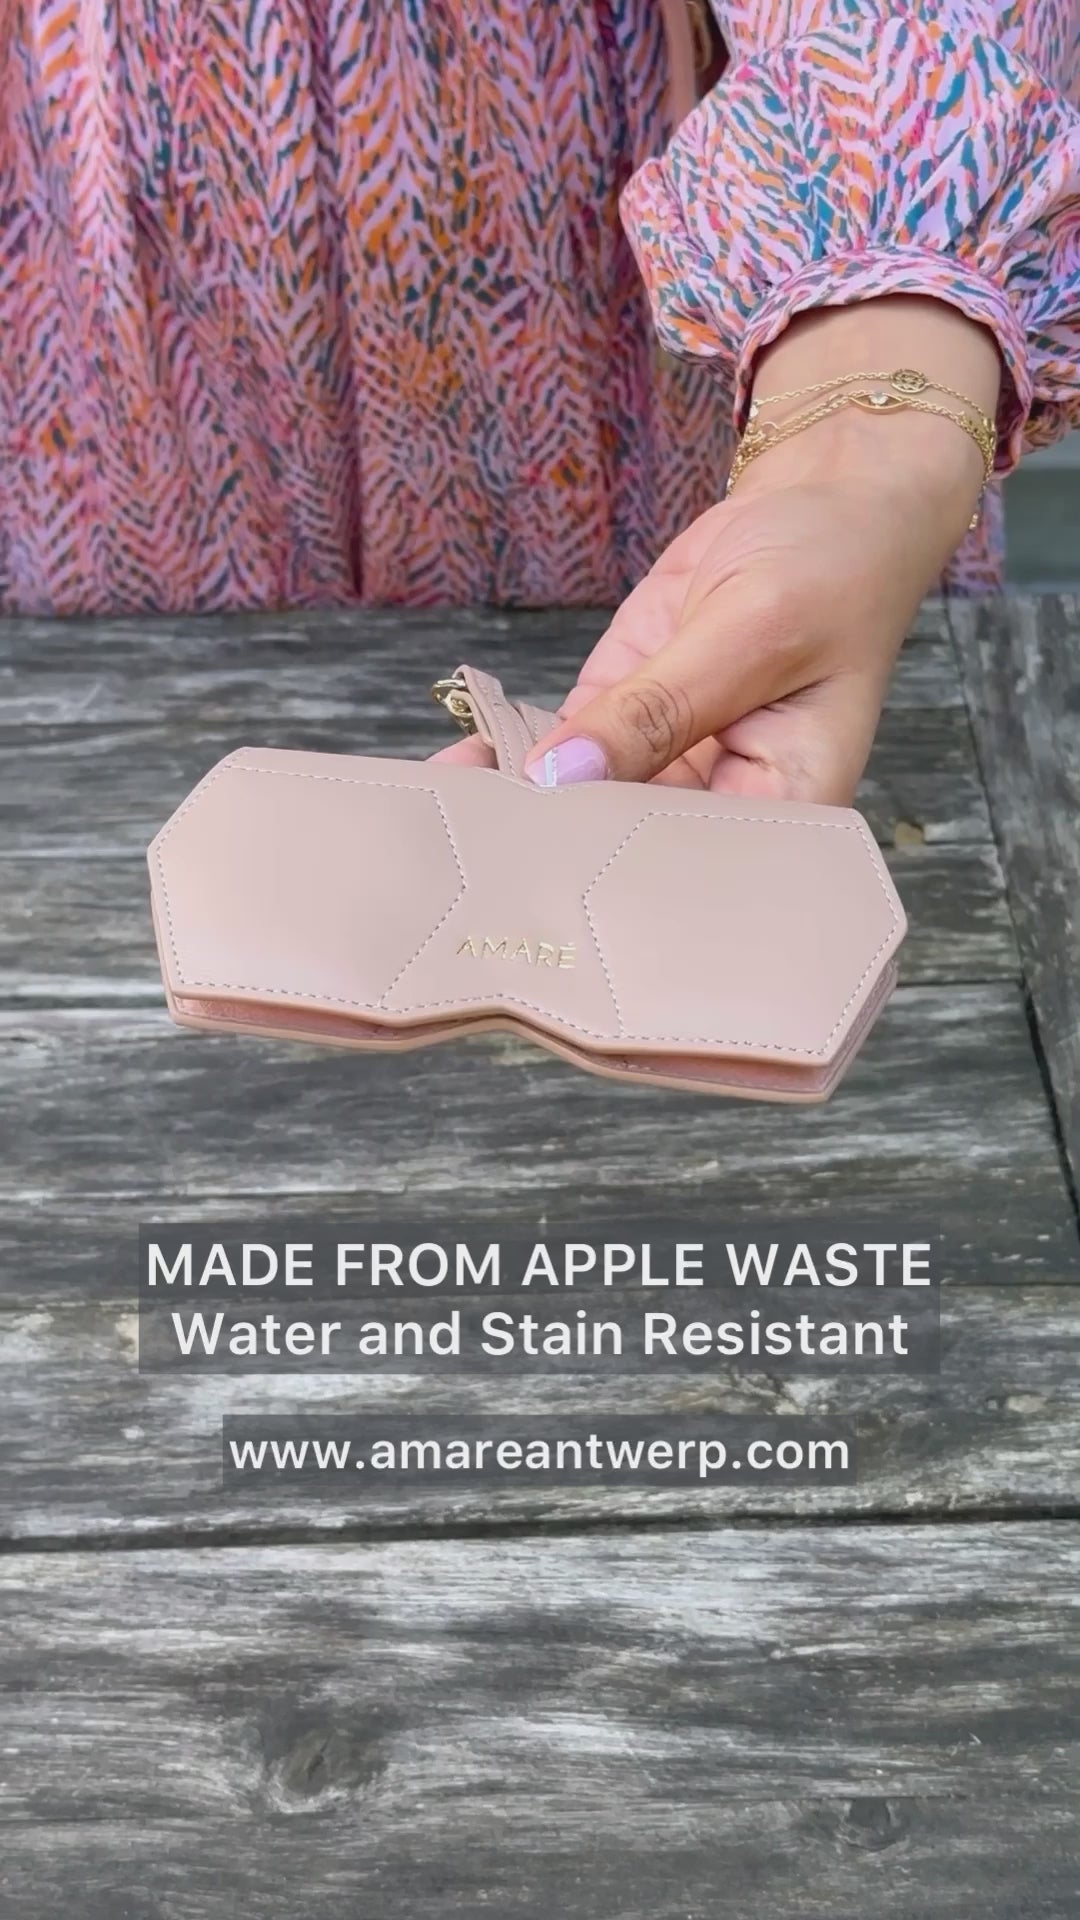 Sunglass cover made from Apple Waste